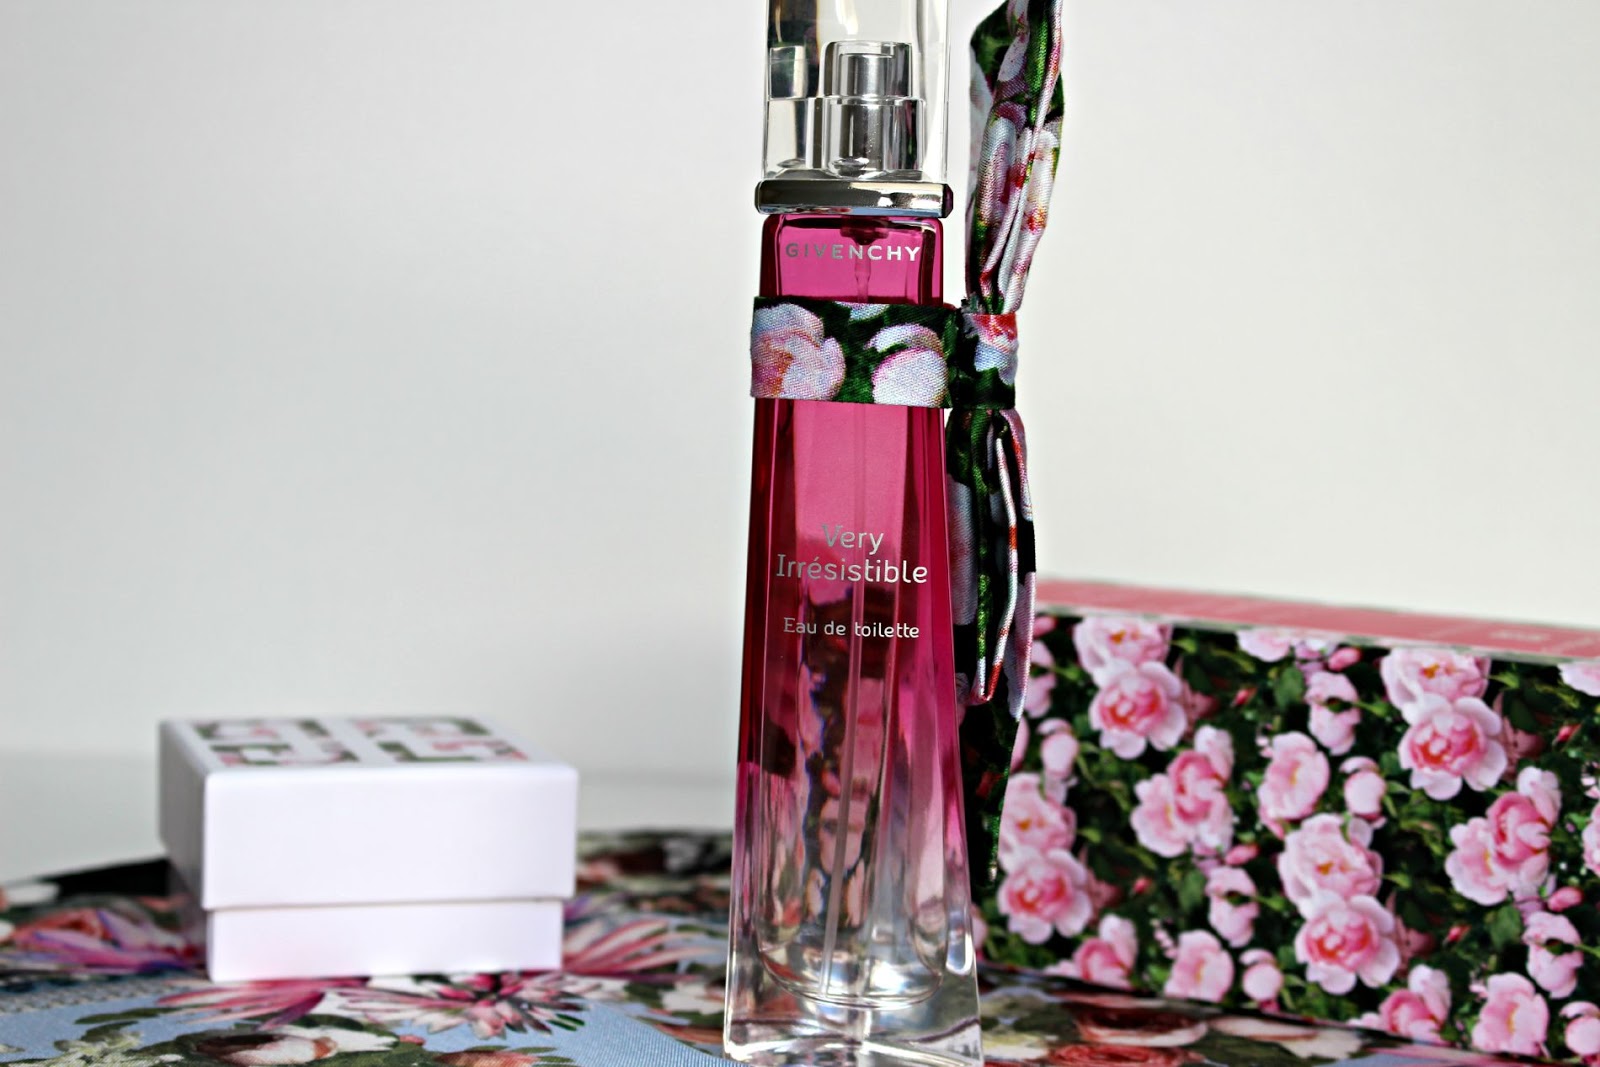 GIVENCHY - VERY IRRÉSISTIBLE LIMITED EDITION | Beauty Treasures